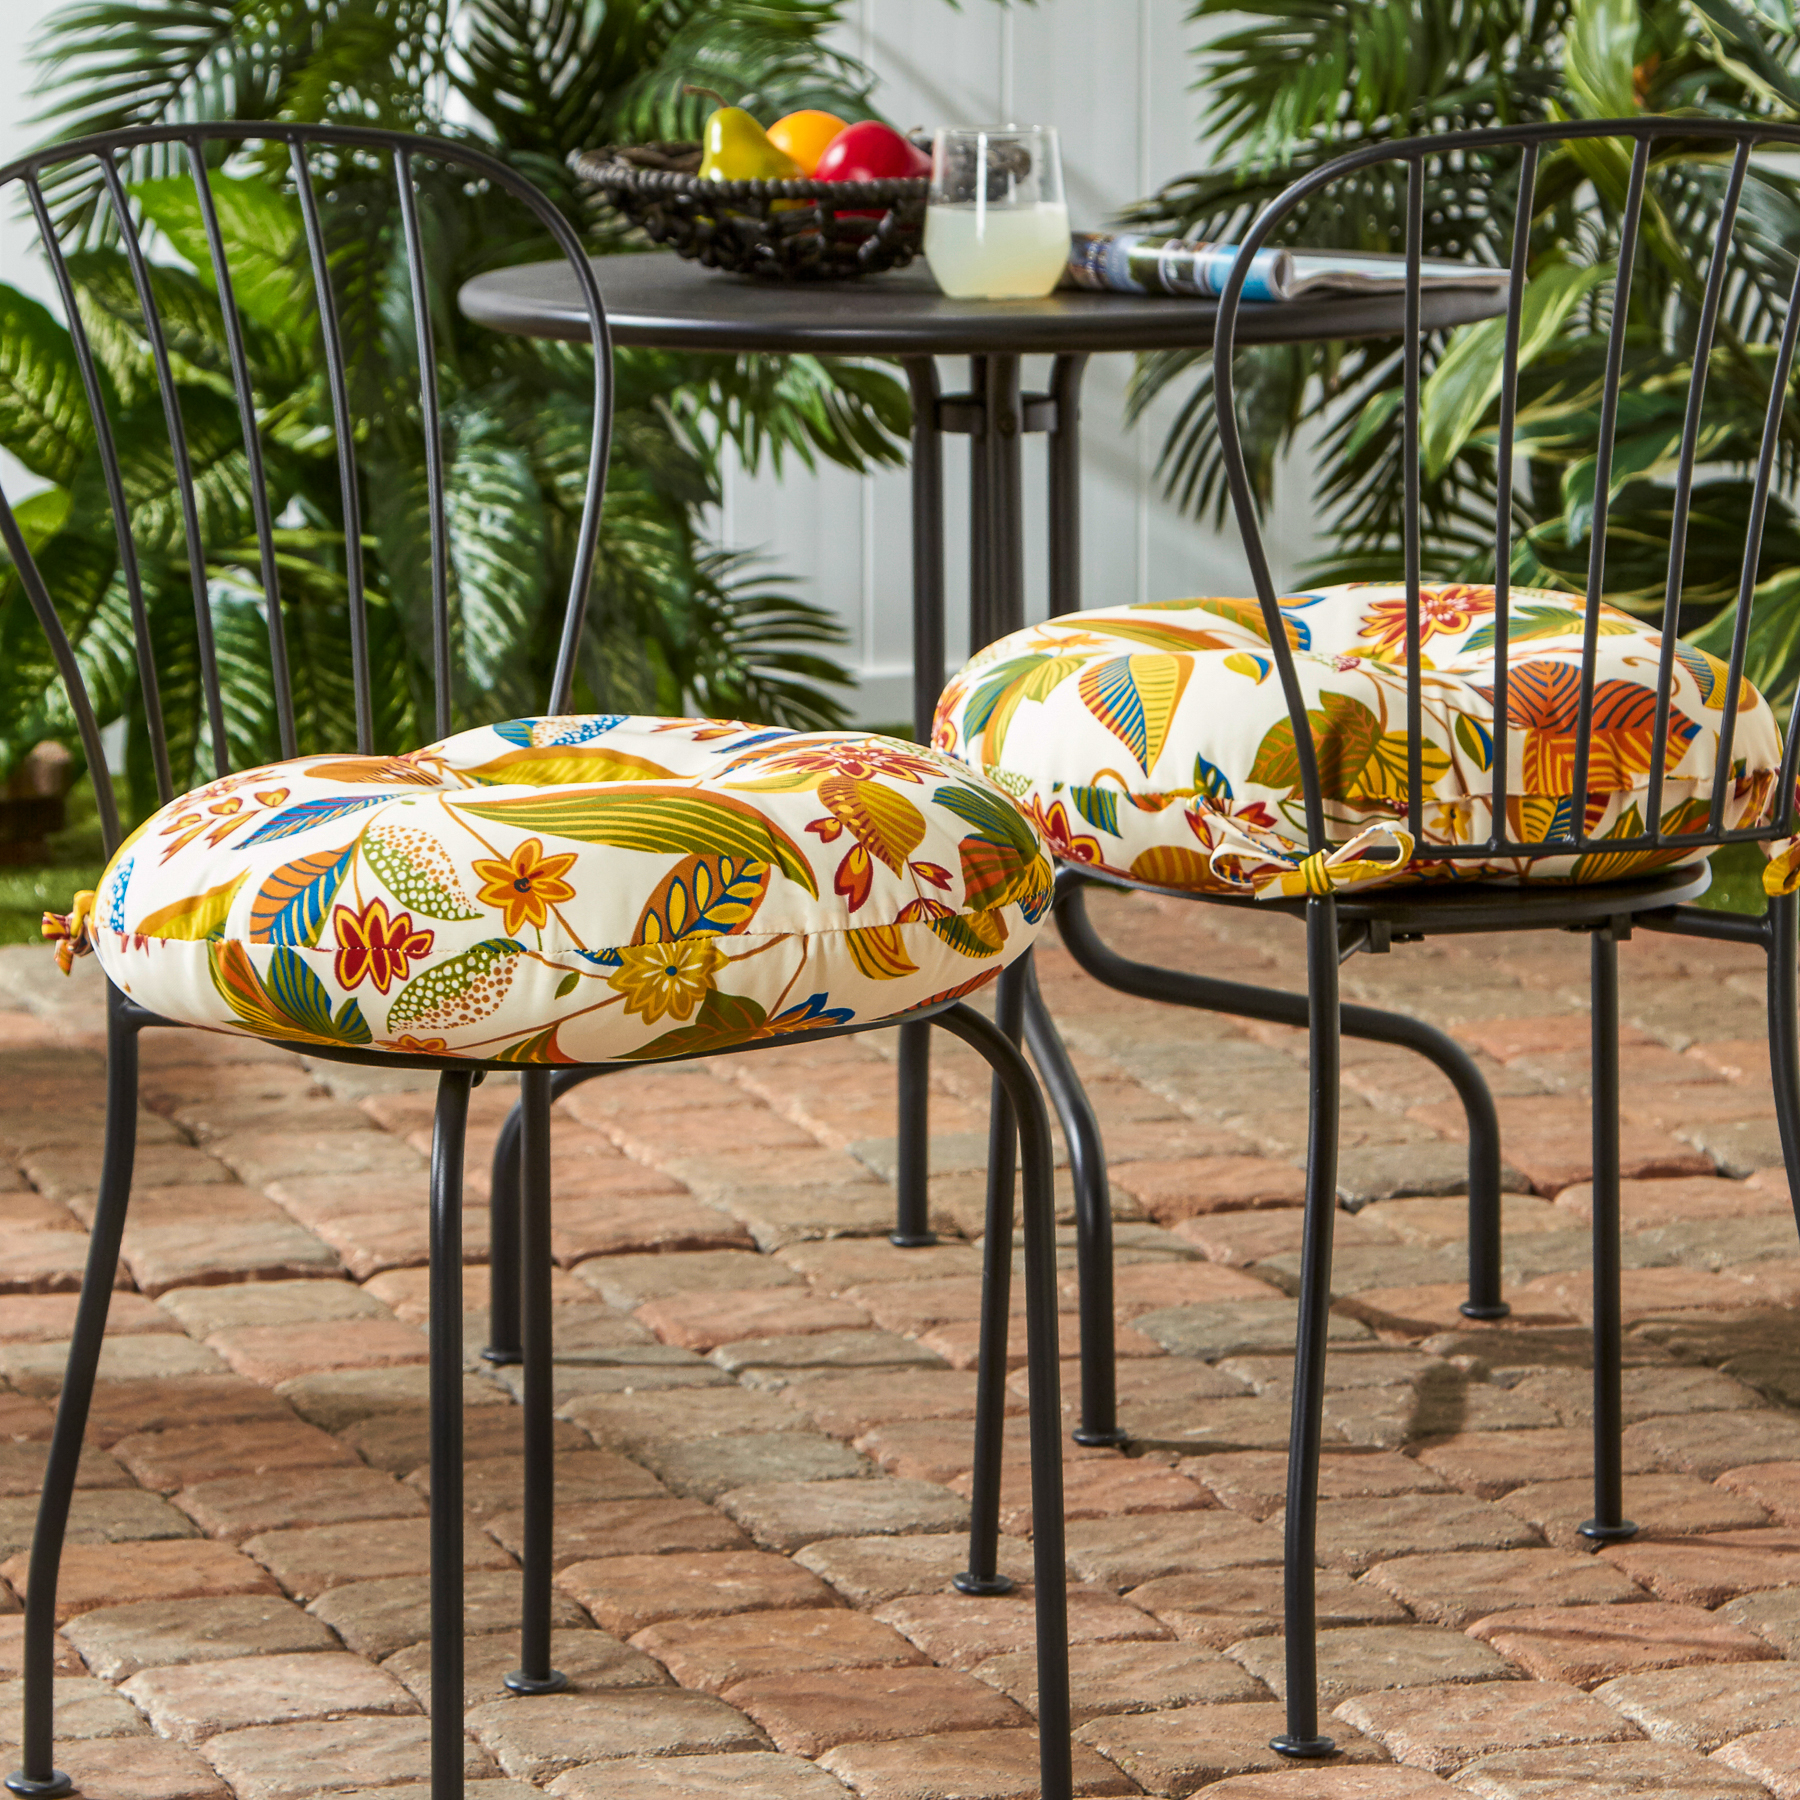 Greendale Home Fashions 18" x 18" Multi-color Floral Round Bistro Chair Outdoor Seating Cushions with Water-Resistant, Stain-Resistant and Fade-Resistant (2 Pieces) - image 3 of 6